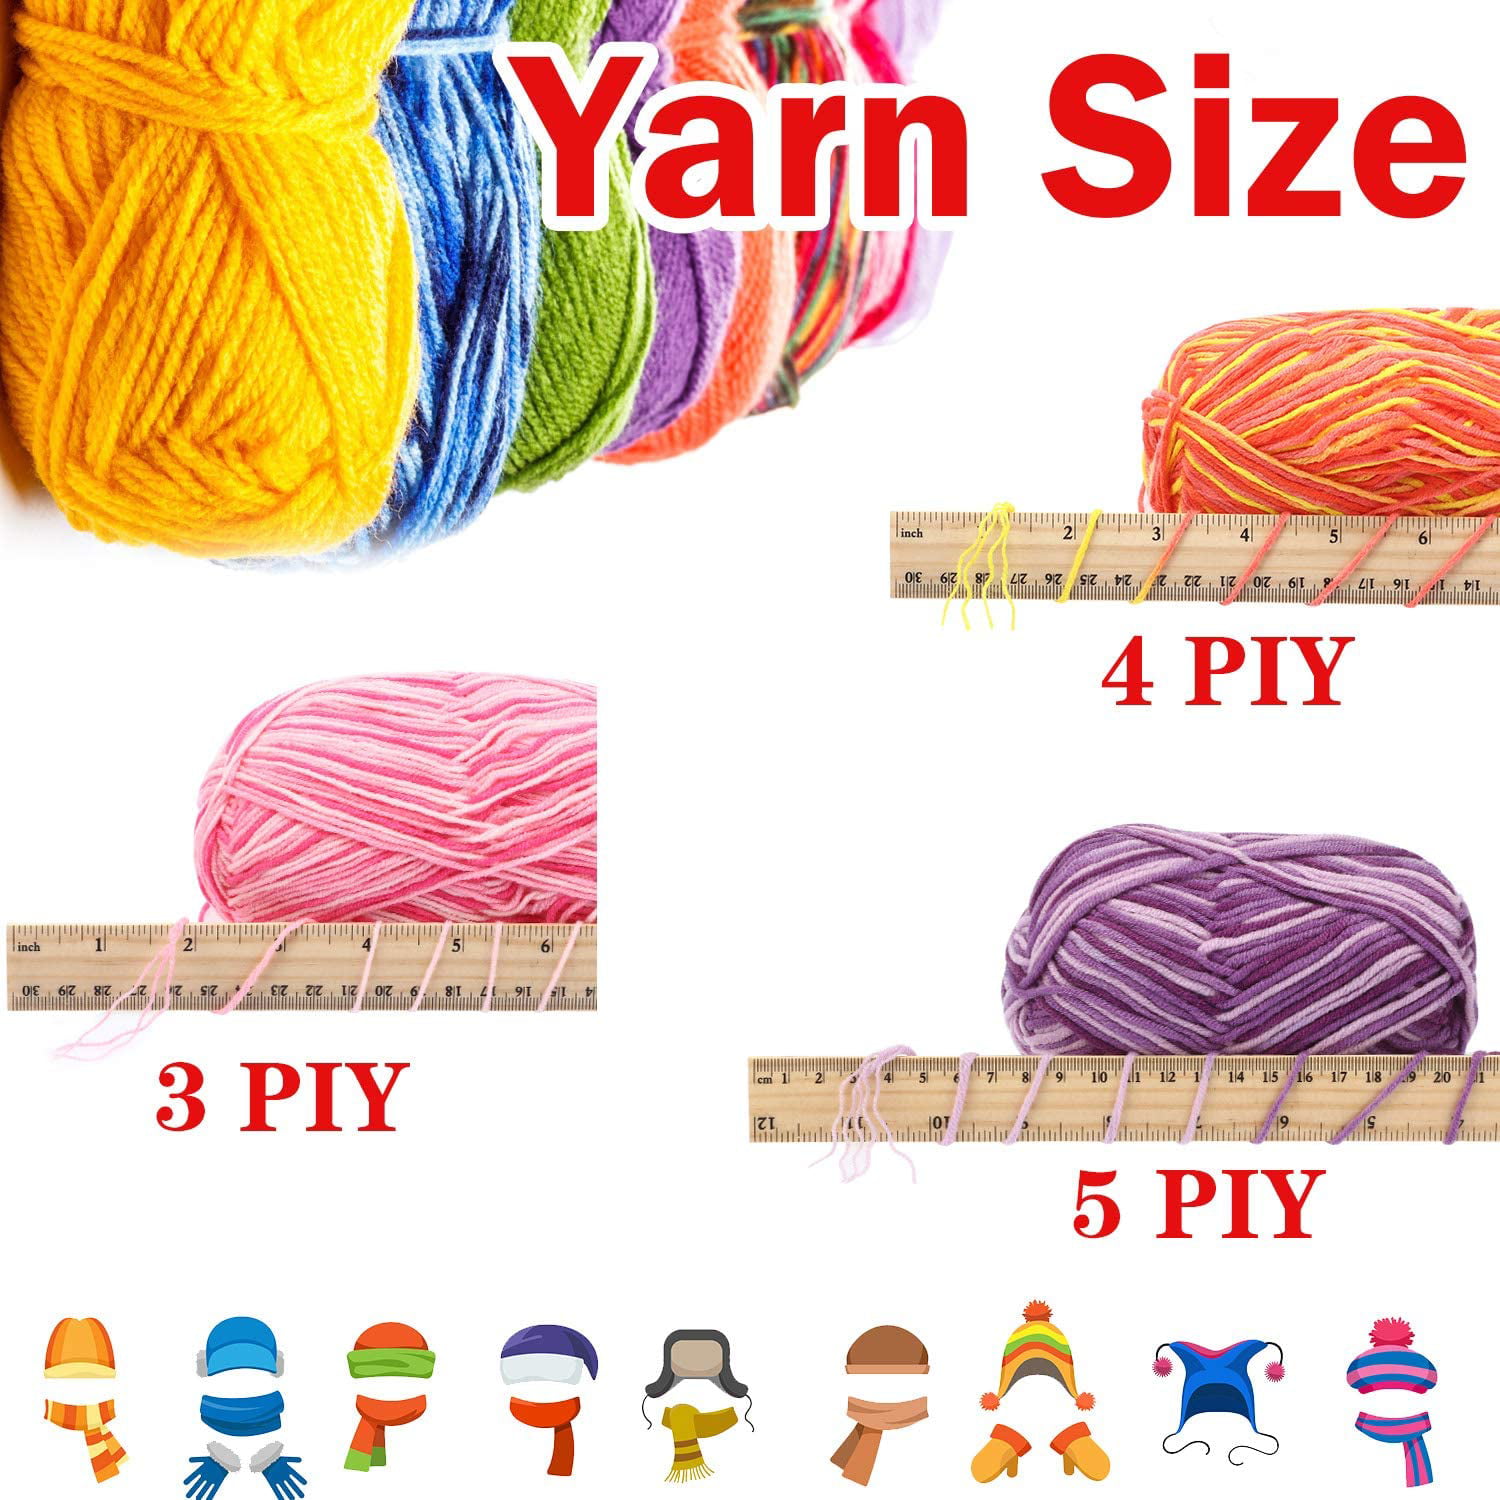  Pllieay Violet Cotton Yarn, 4x50g Crochet Yarn for Crocheting  and Knitting, Cotton Yarn for Beginners with Easy to See Stitches for  Beginners Crocheting and Knitting